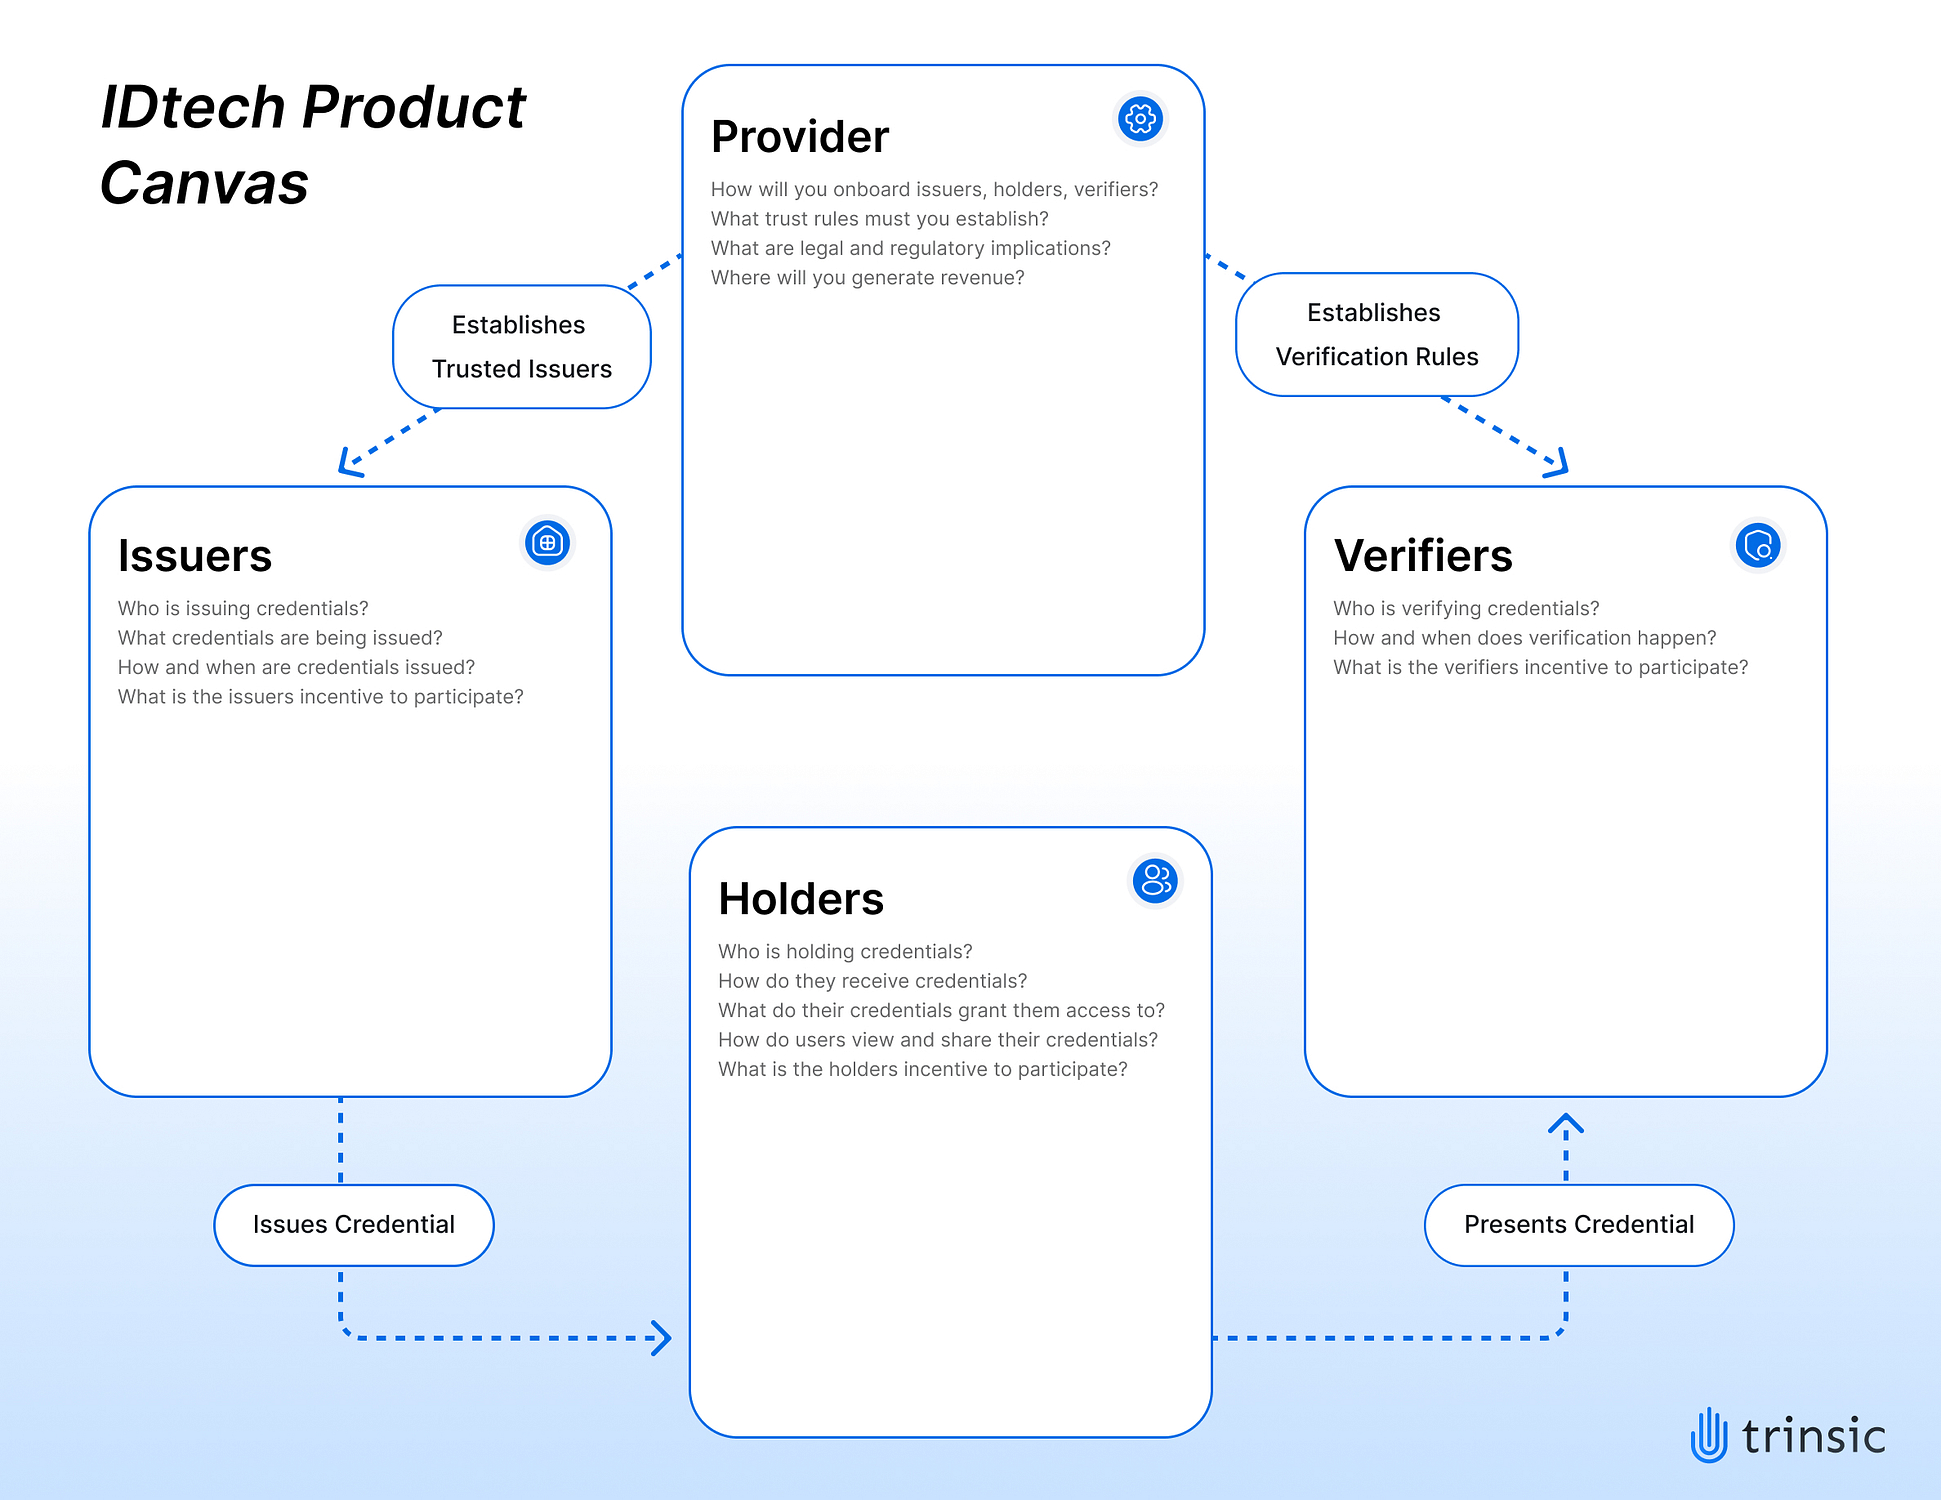 IDtech Product Canvas